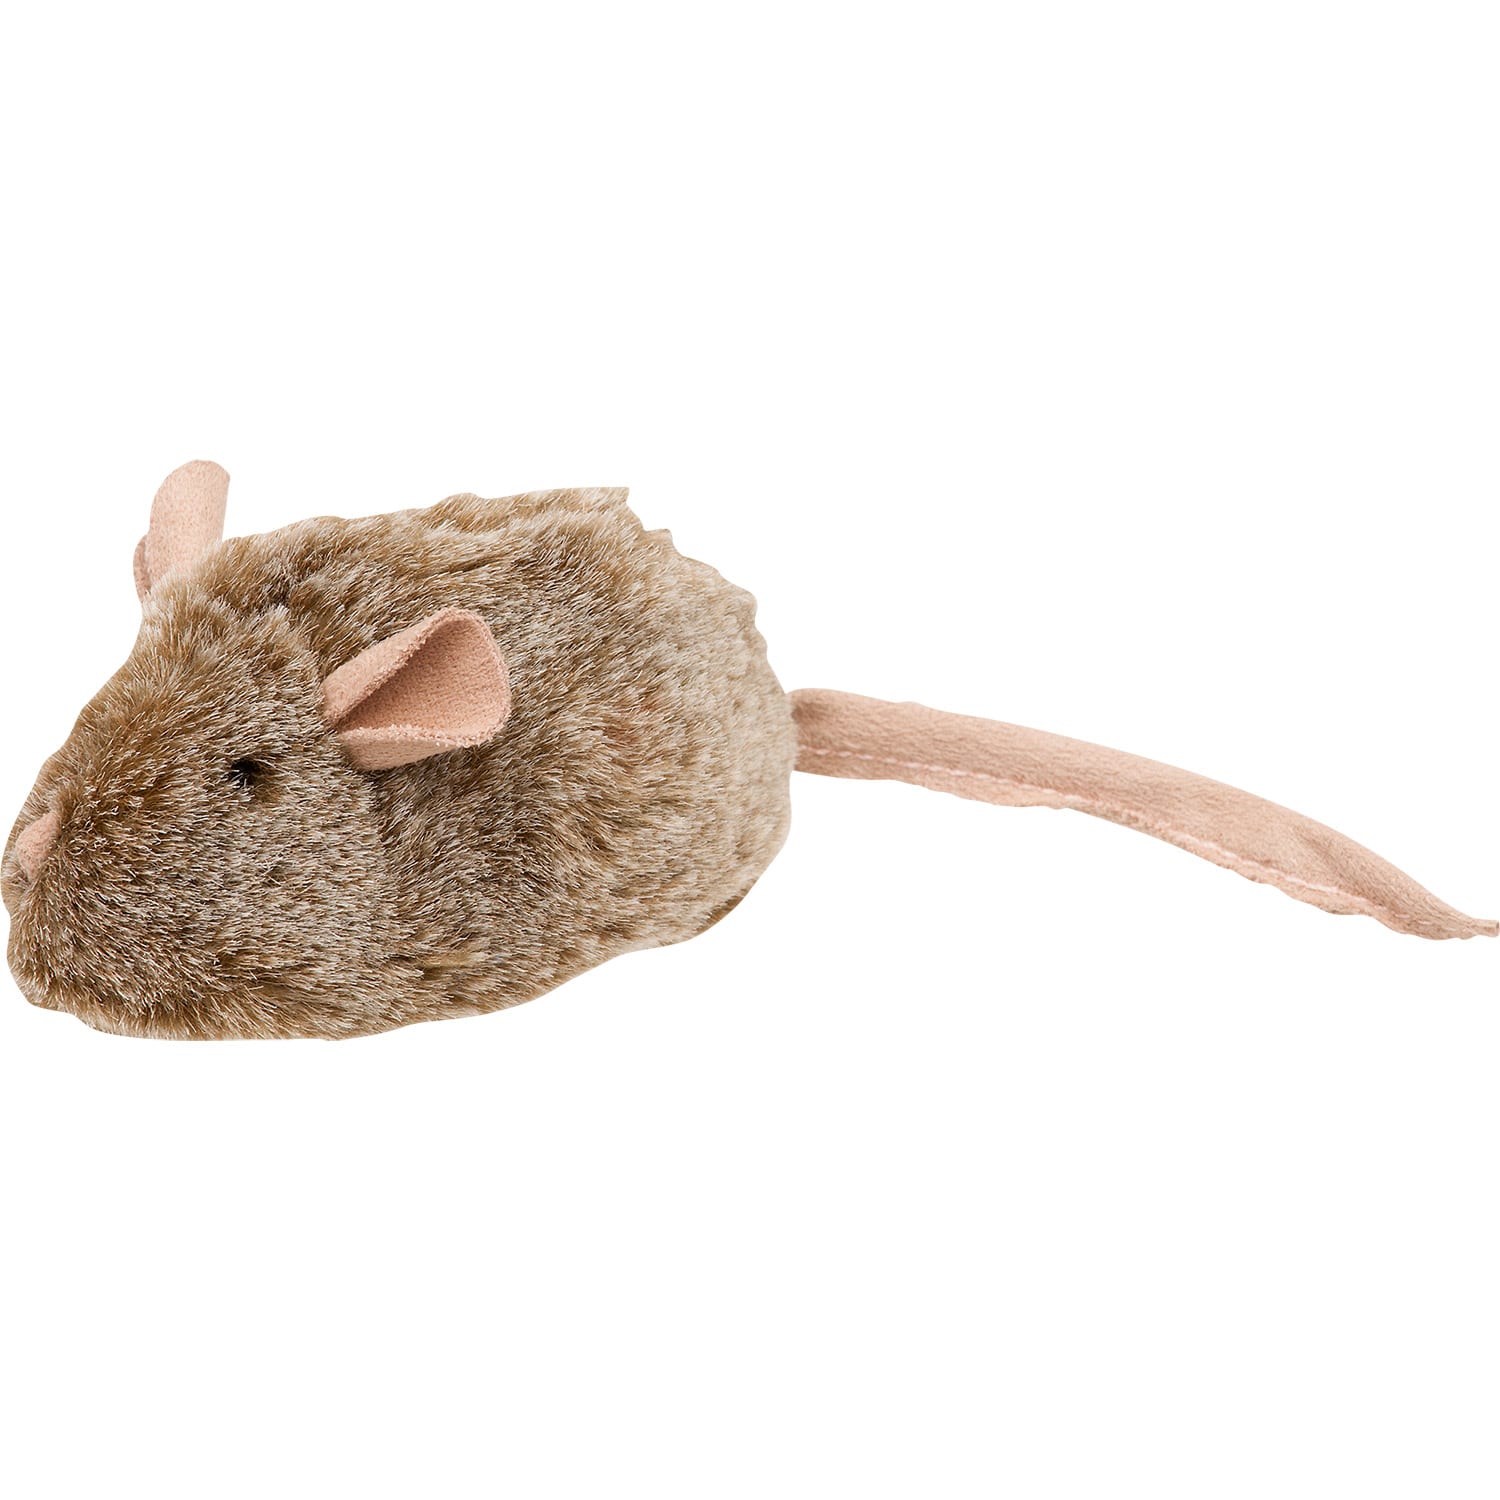 chirping mouse cat toy